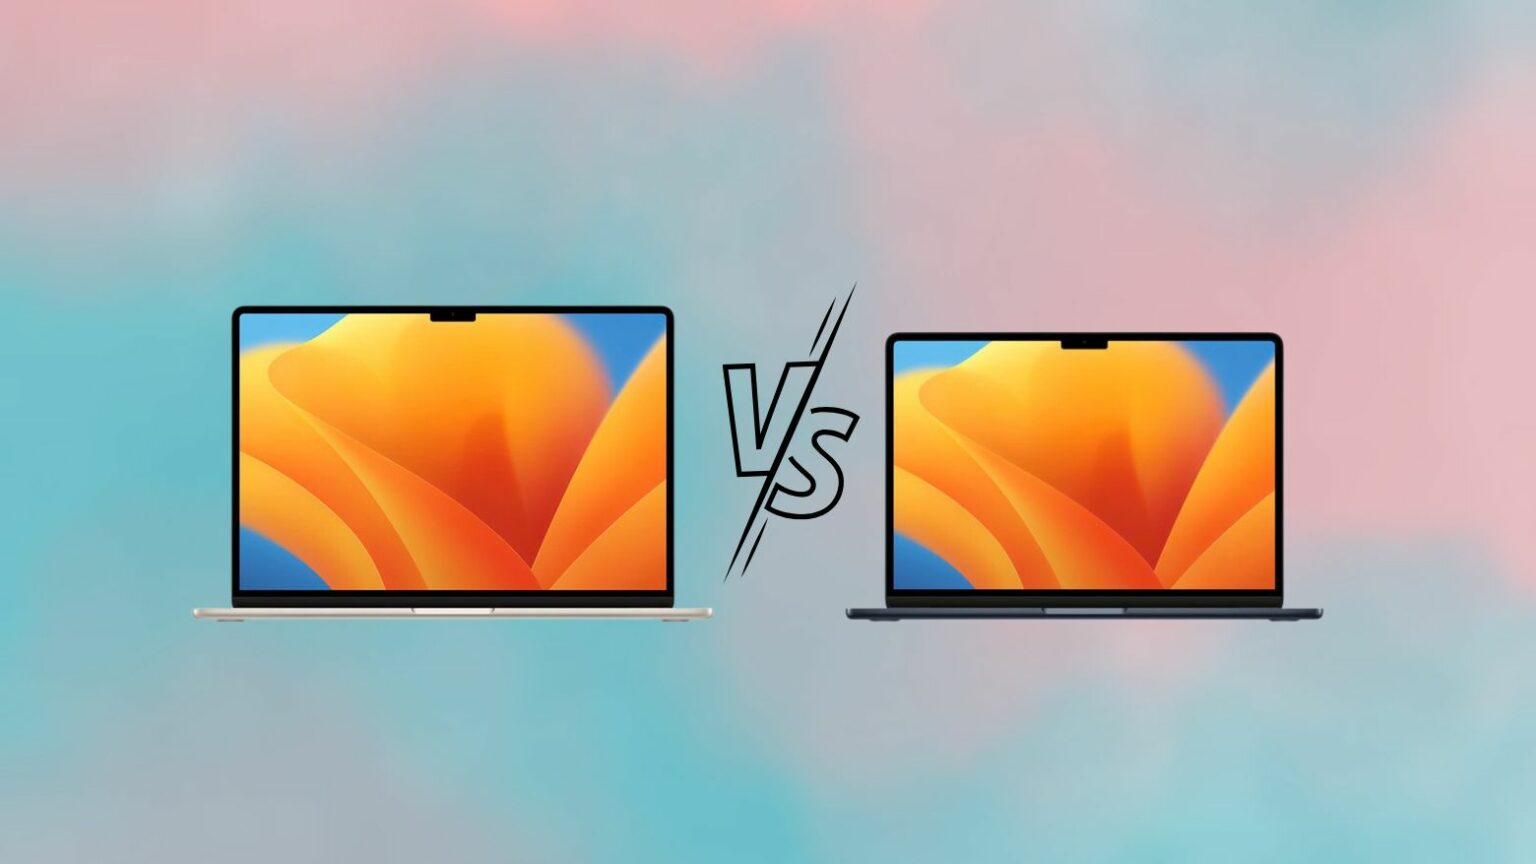 13-inch vs. 15-inch MacBook Air: Which one should you buy?